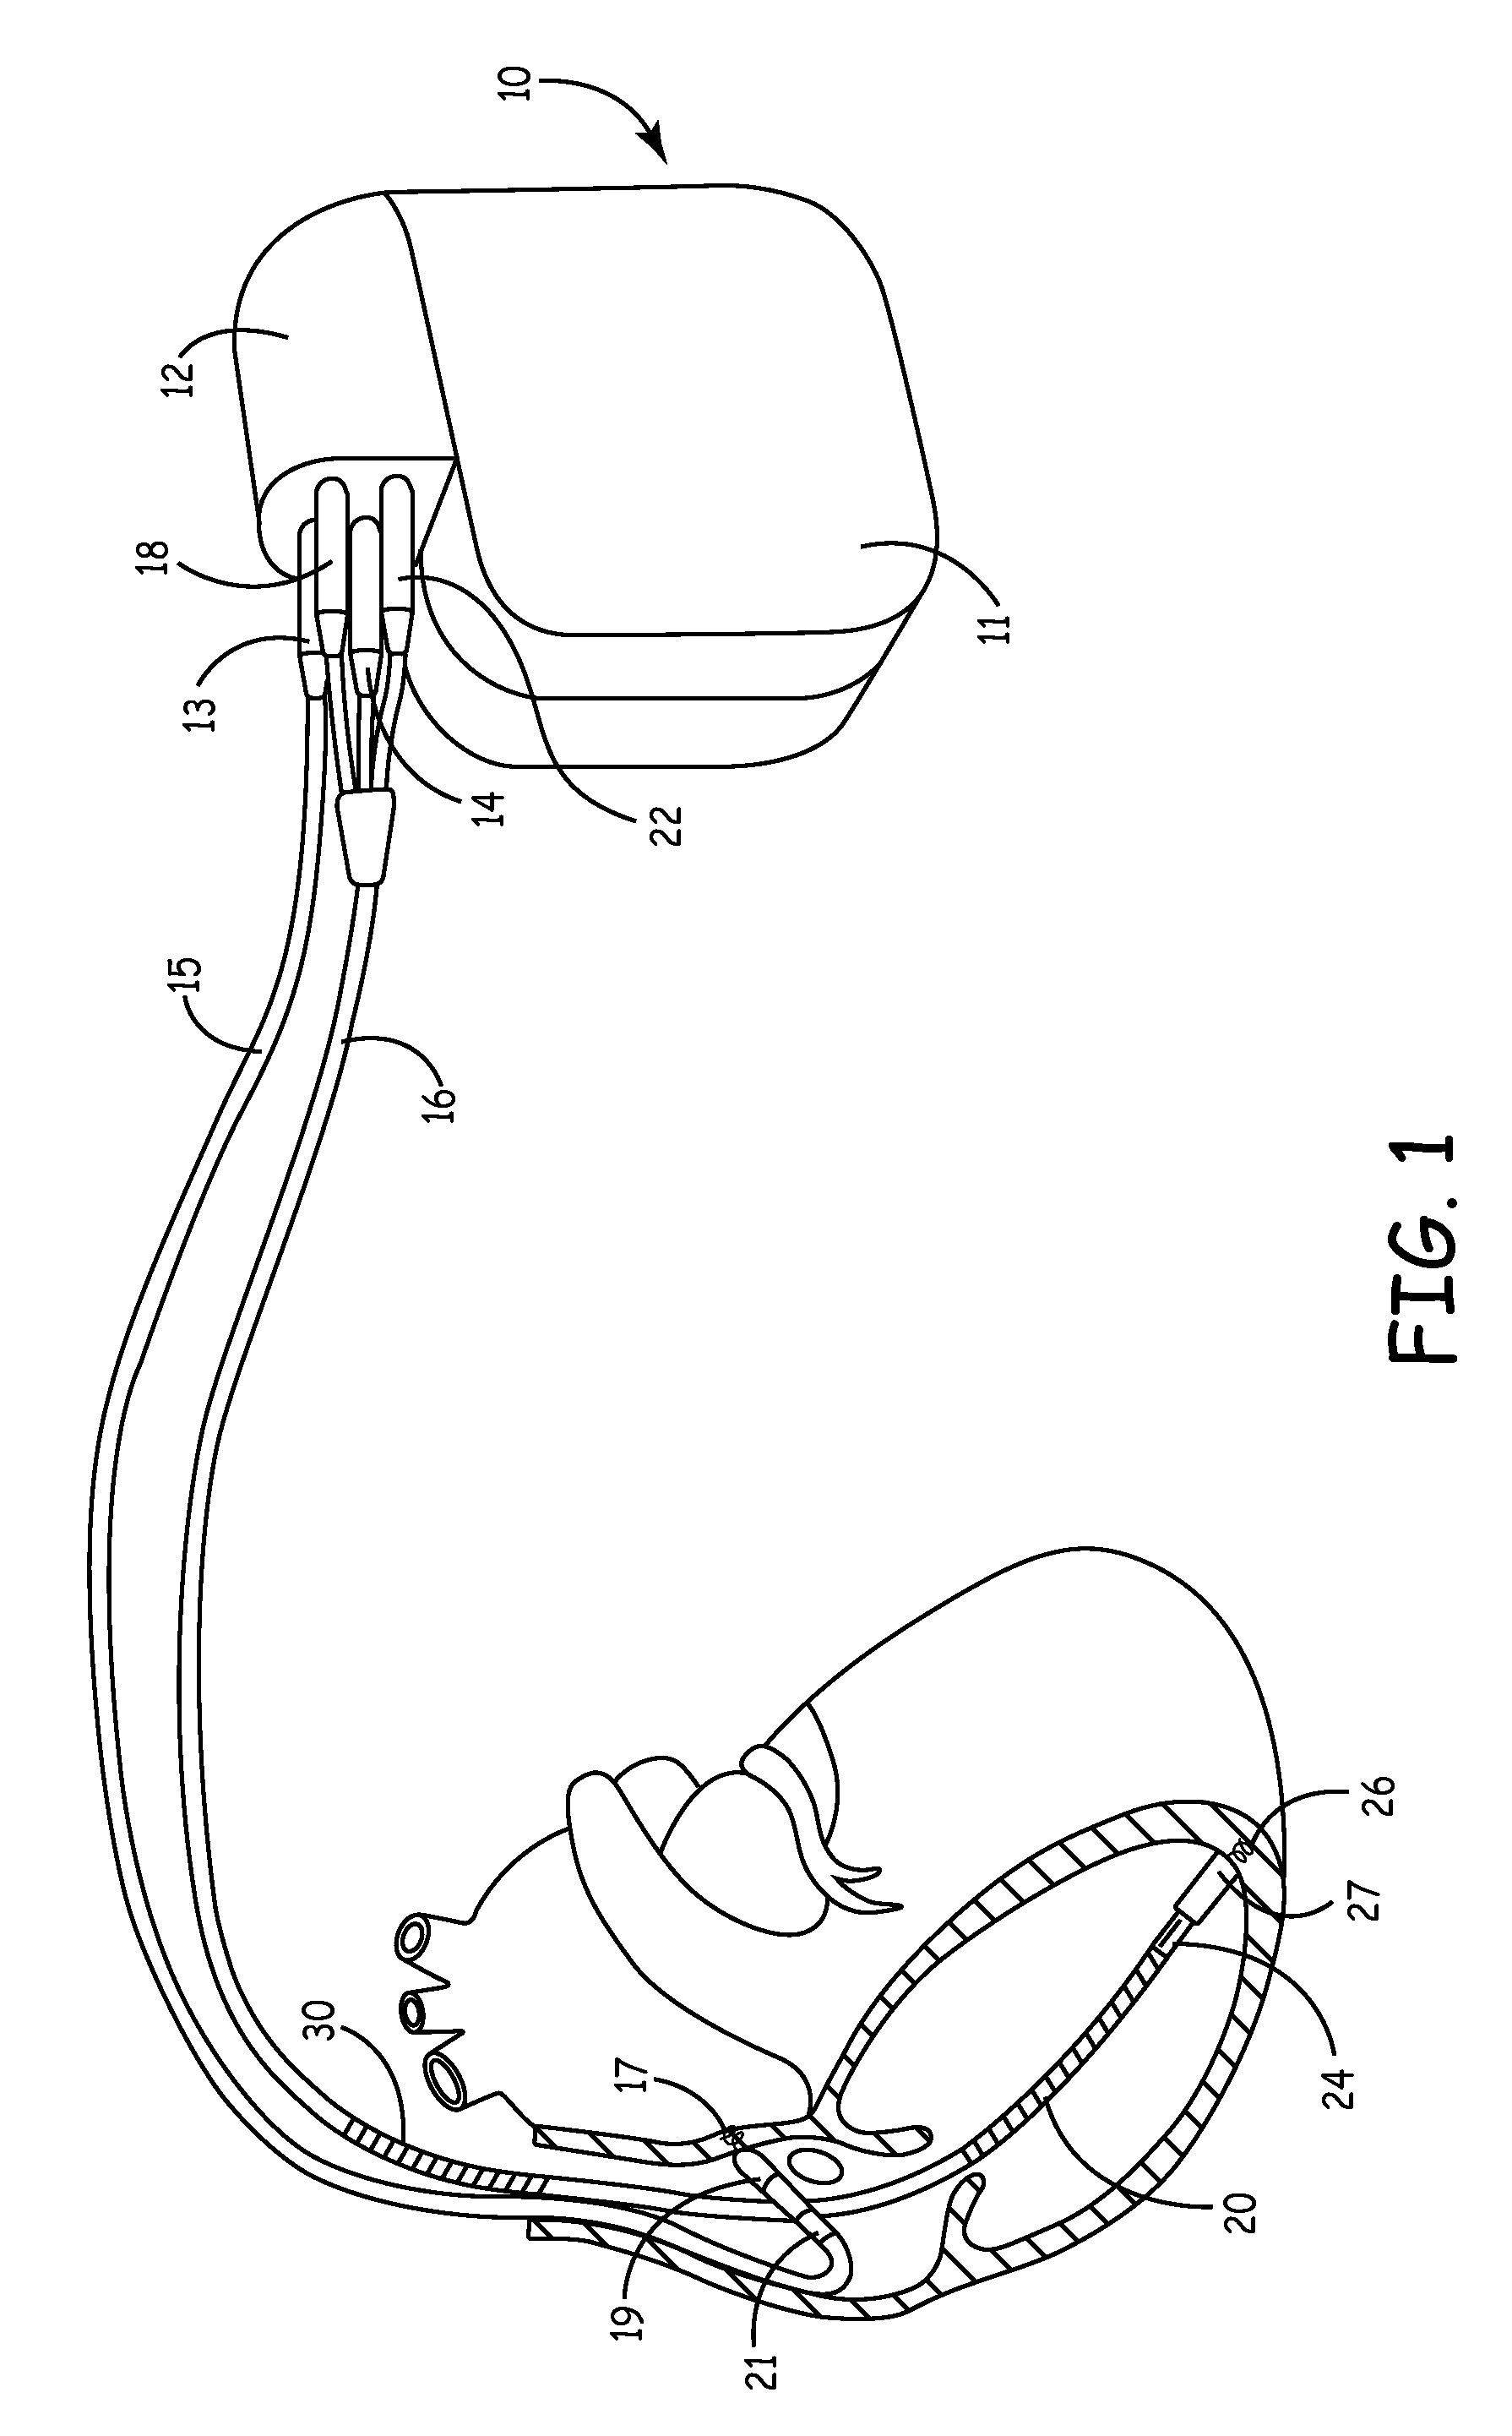 Implantable medical device and method for delivering therapy for sleep-disordered breathing